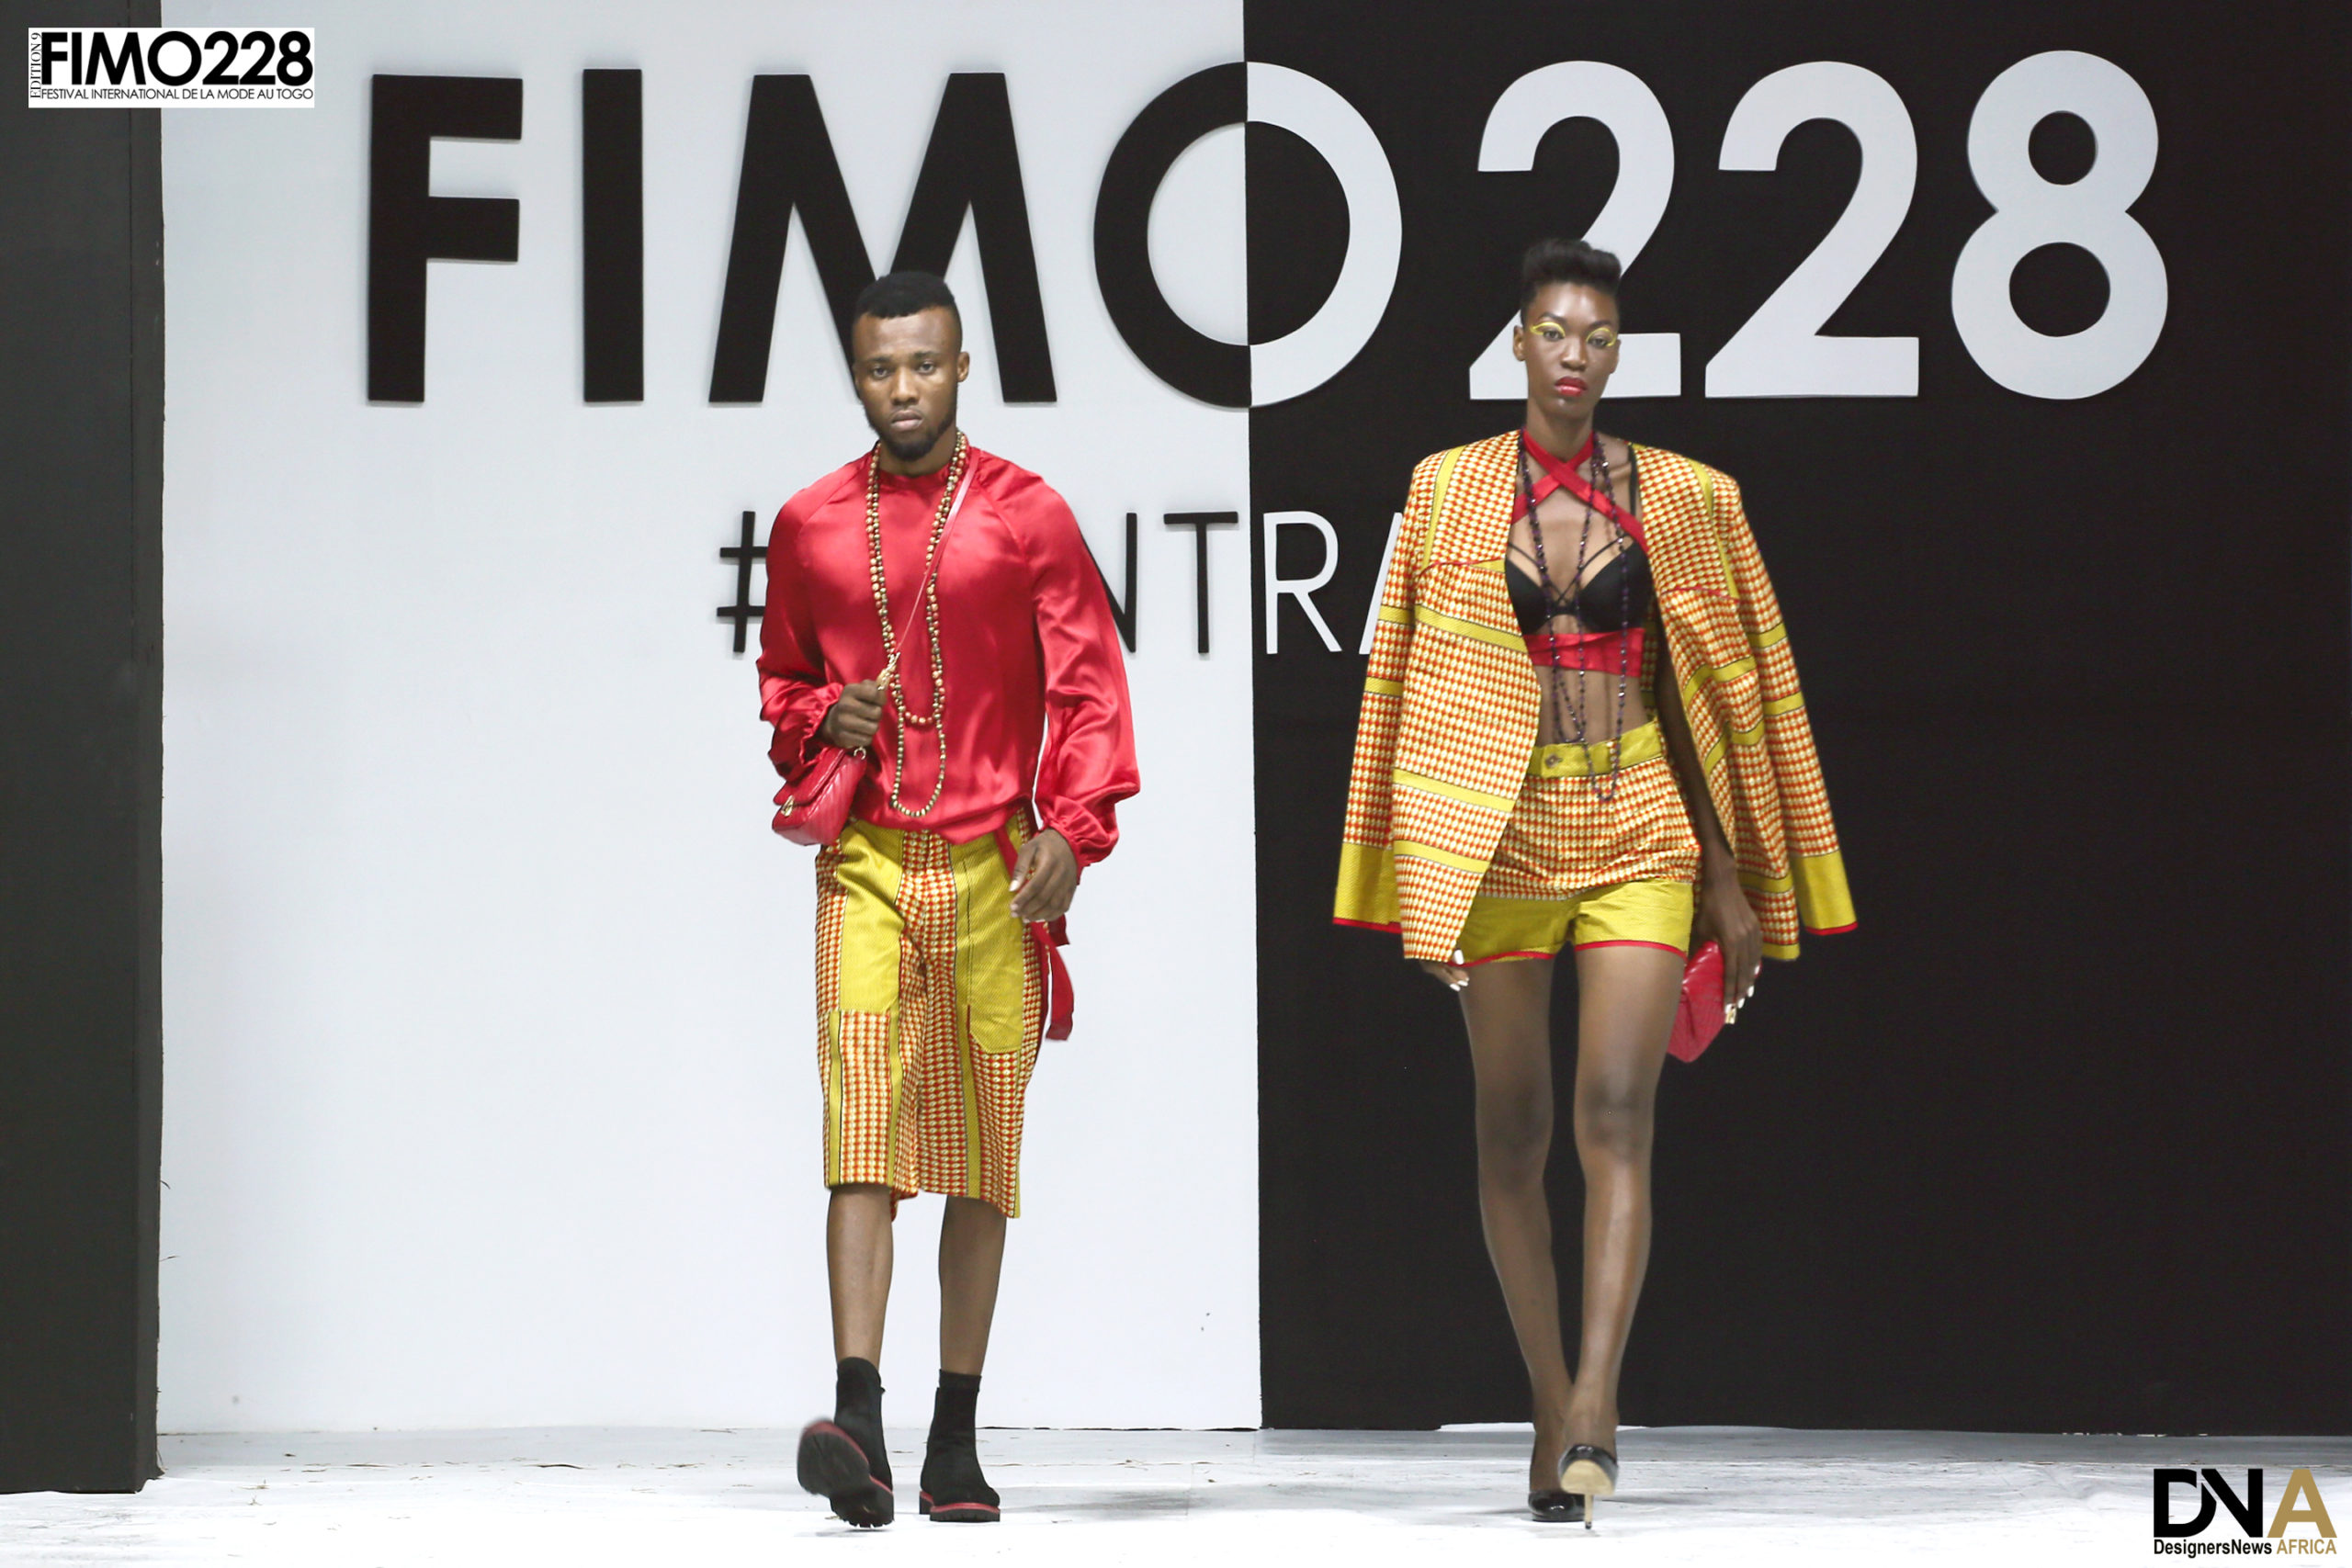 BEST AFRICAN FASHION MAGAZINE FIMO-228-EDITION-9-2022-DEFILE-CLASSIQUE-DESIGNER--THE-MAN-MICHELLE-ANGE-NACTO-DN-AFRICA-DNA-INTERNATIONAL-MEDIA-PARTNER-MD0A0210